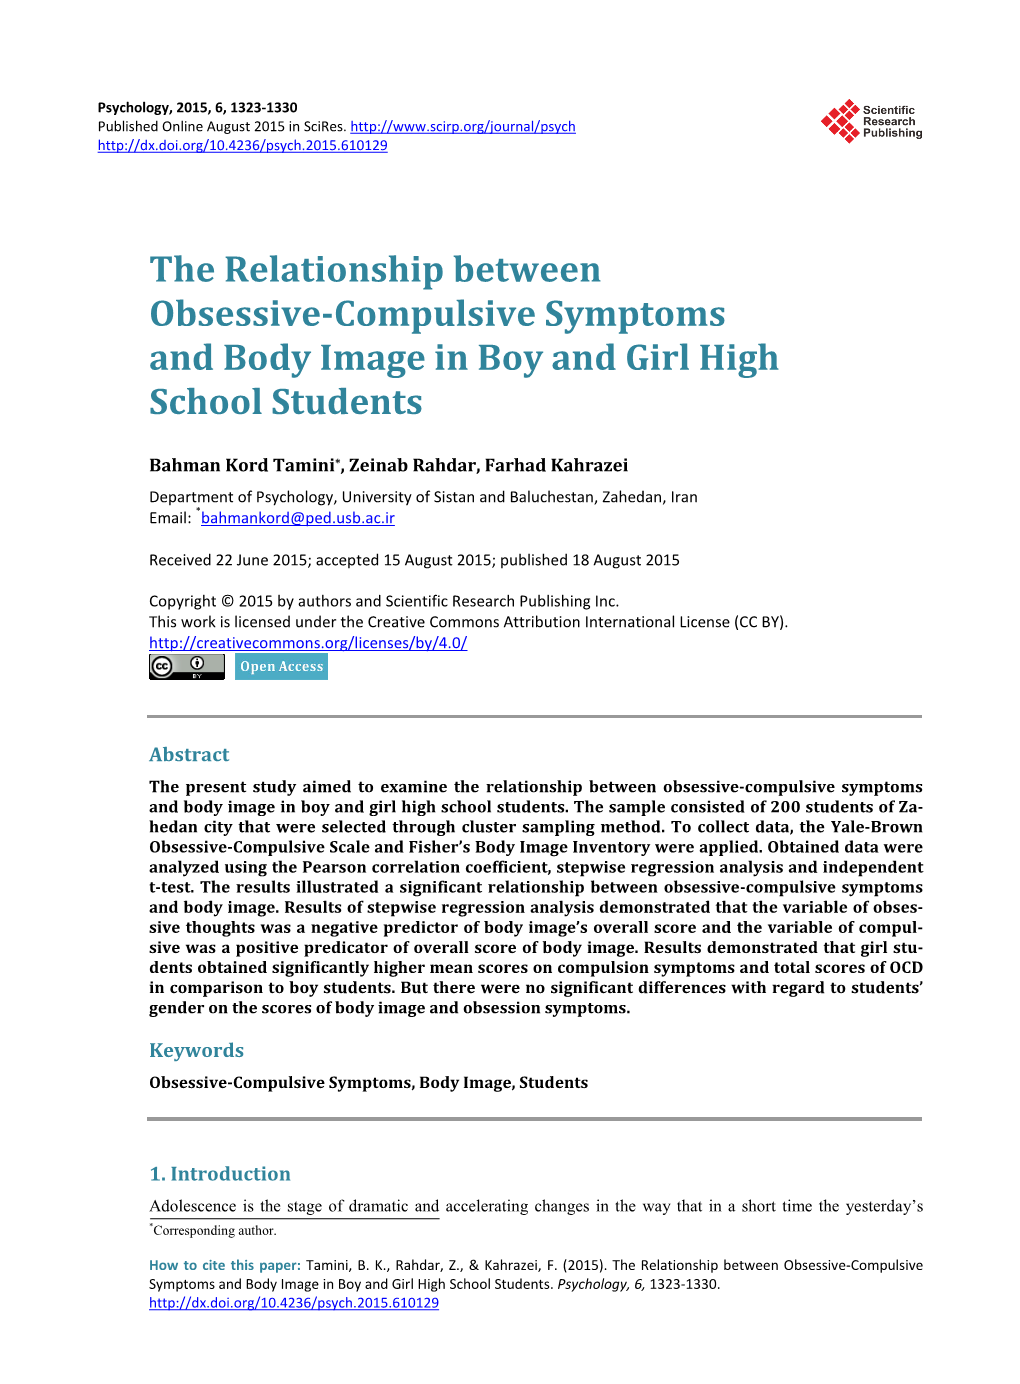 The Relationship Between Obsessive-Compulsive Symptoms and Body Image in Boy and Girl High School Students